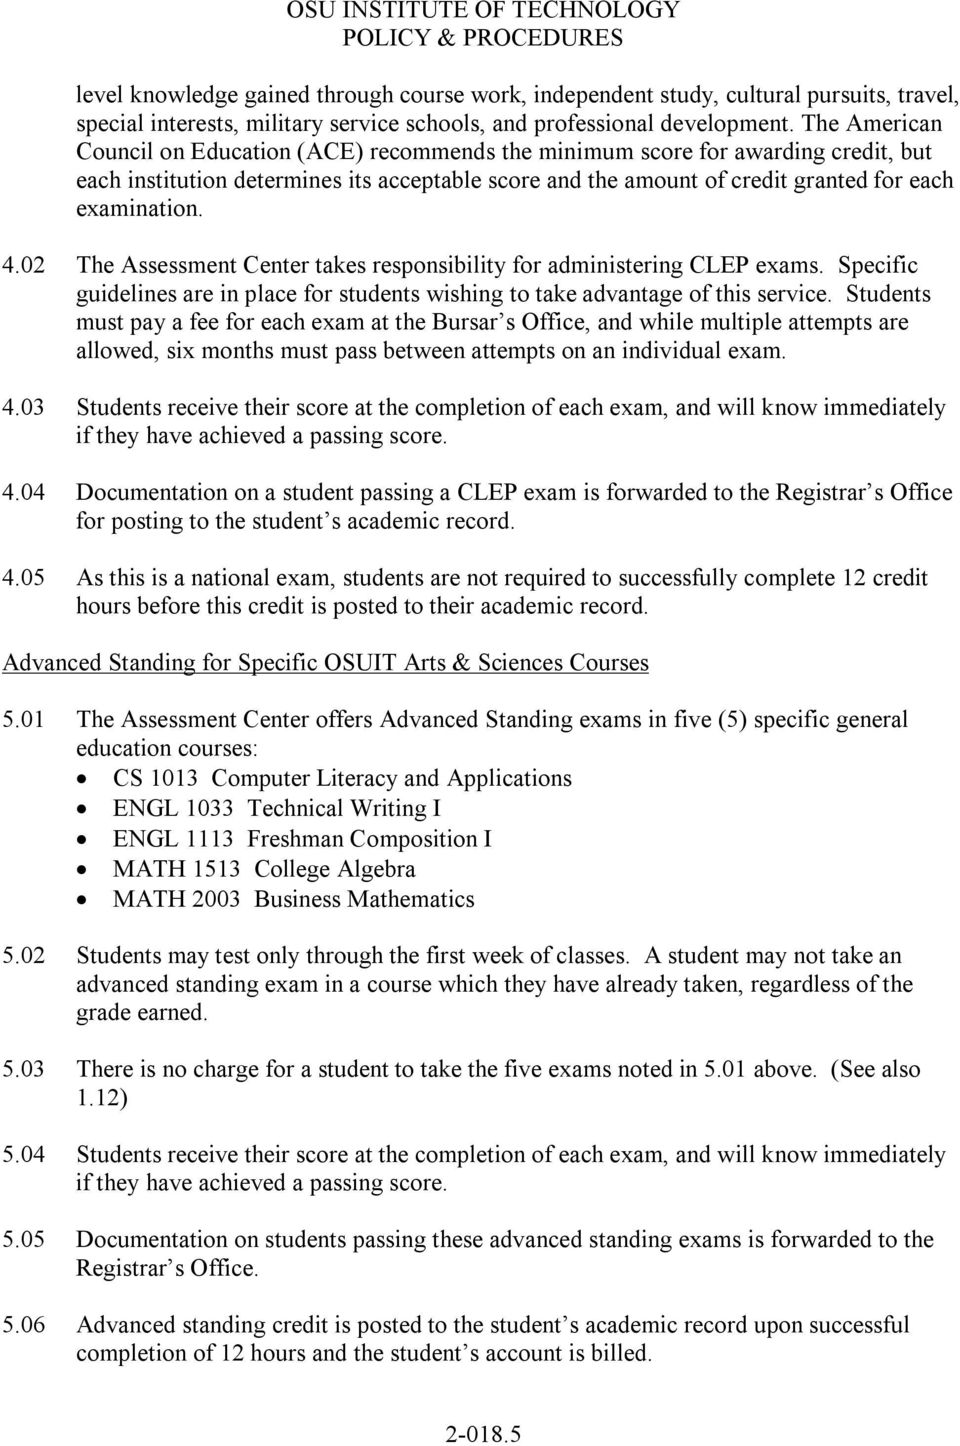 02 The Assessment Center takes responsibility for administering CLEP exams. Specific guidelines are in place for students wishing to take advantage of this service.